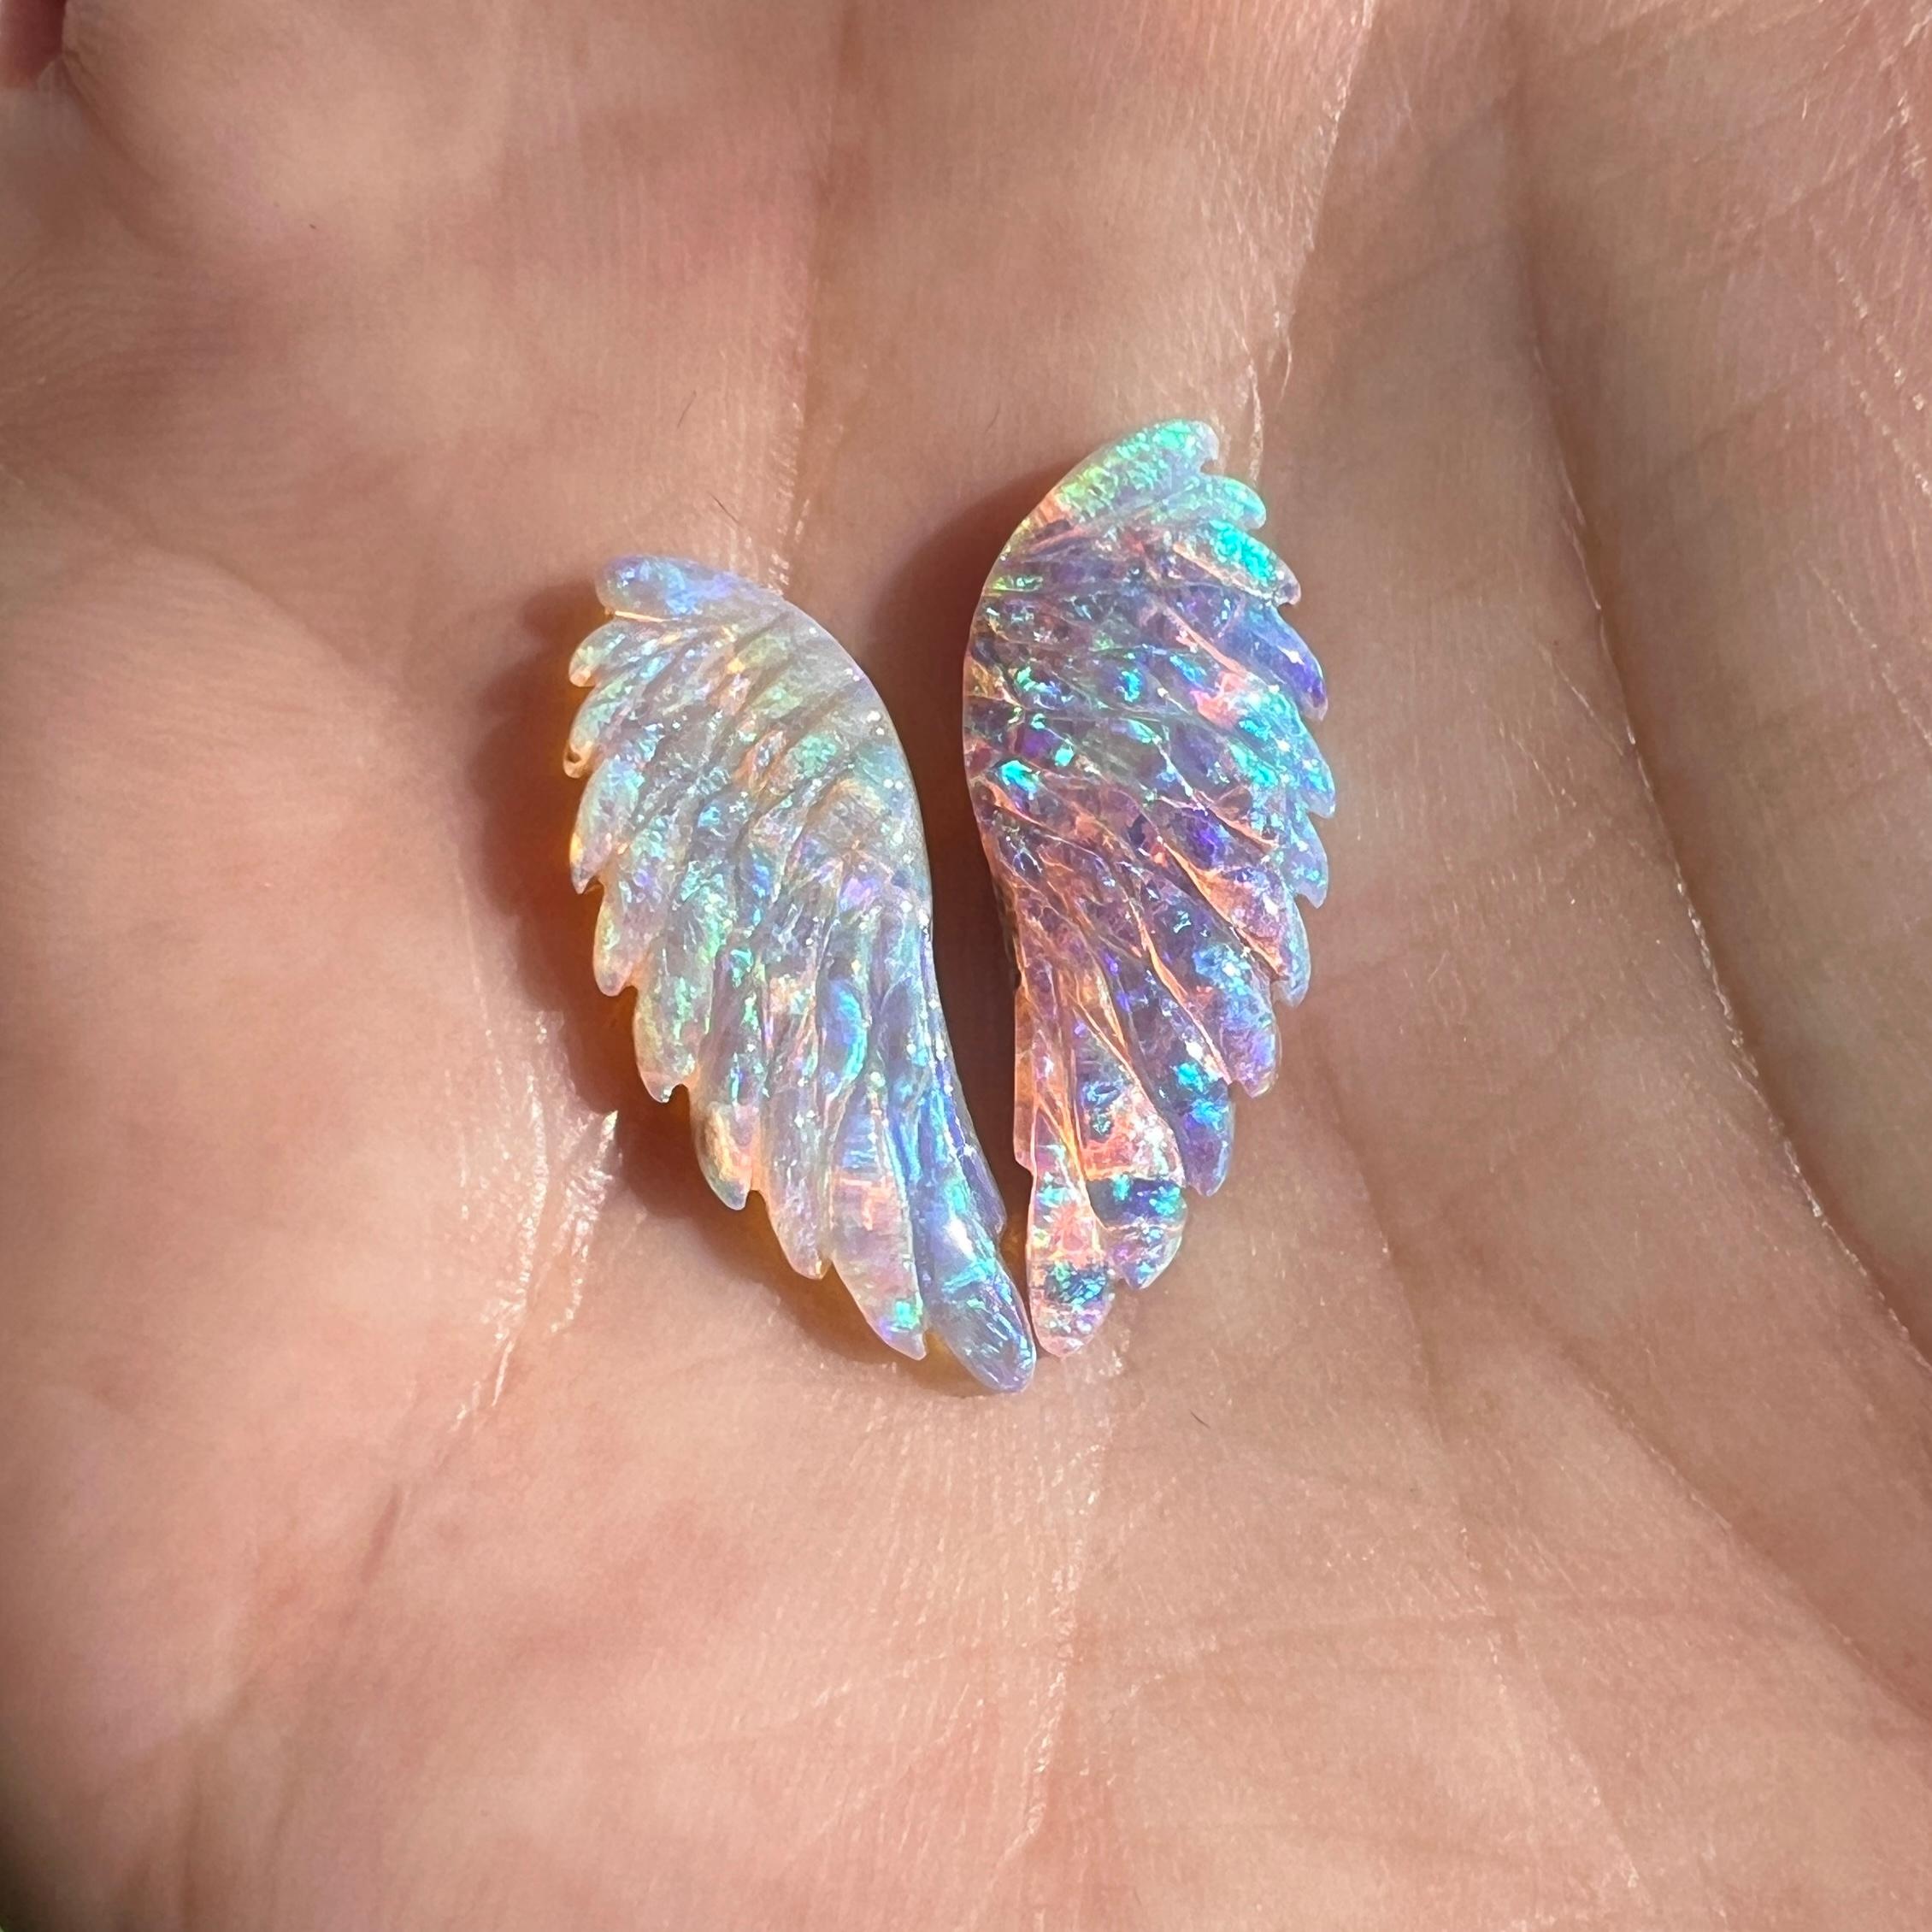 Cabochon Natural 6.07 Ct Australian Gem Crystal Angel Wings Opal mined Sue Cooper  For Sale